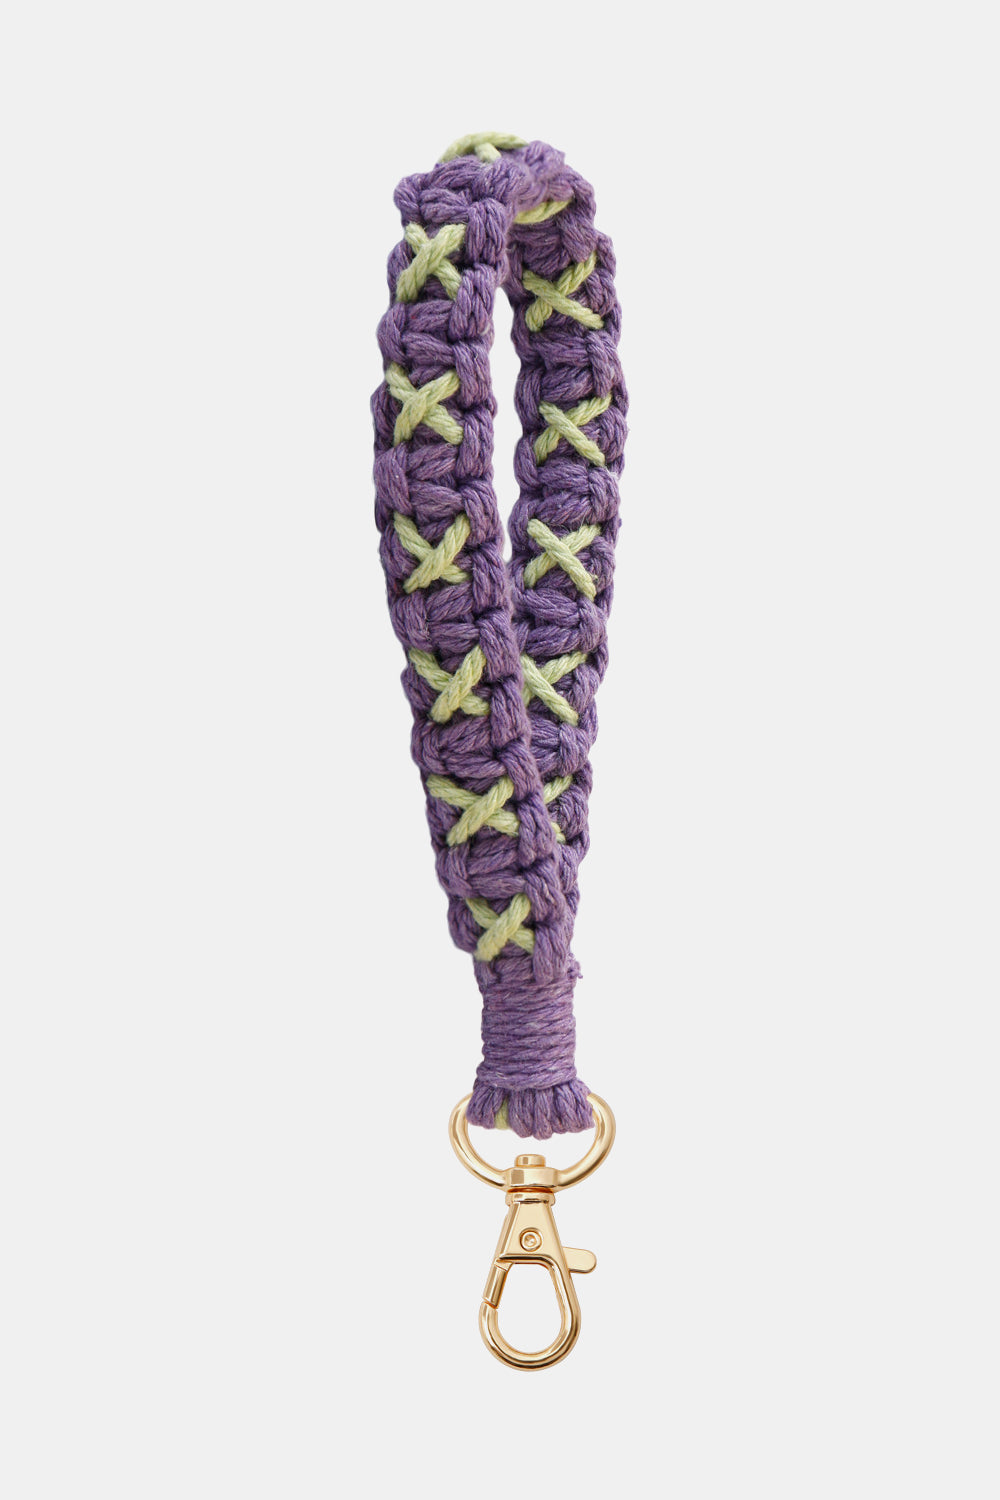 Contrast Macrame Key Chain - Spruced Roost